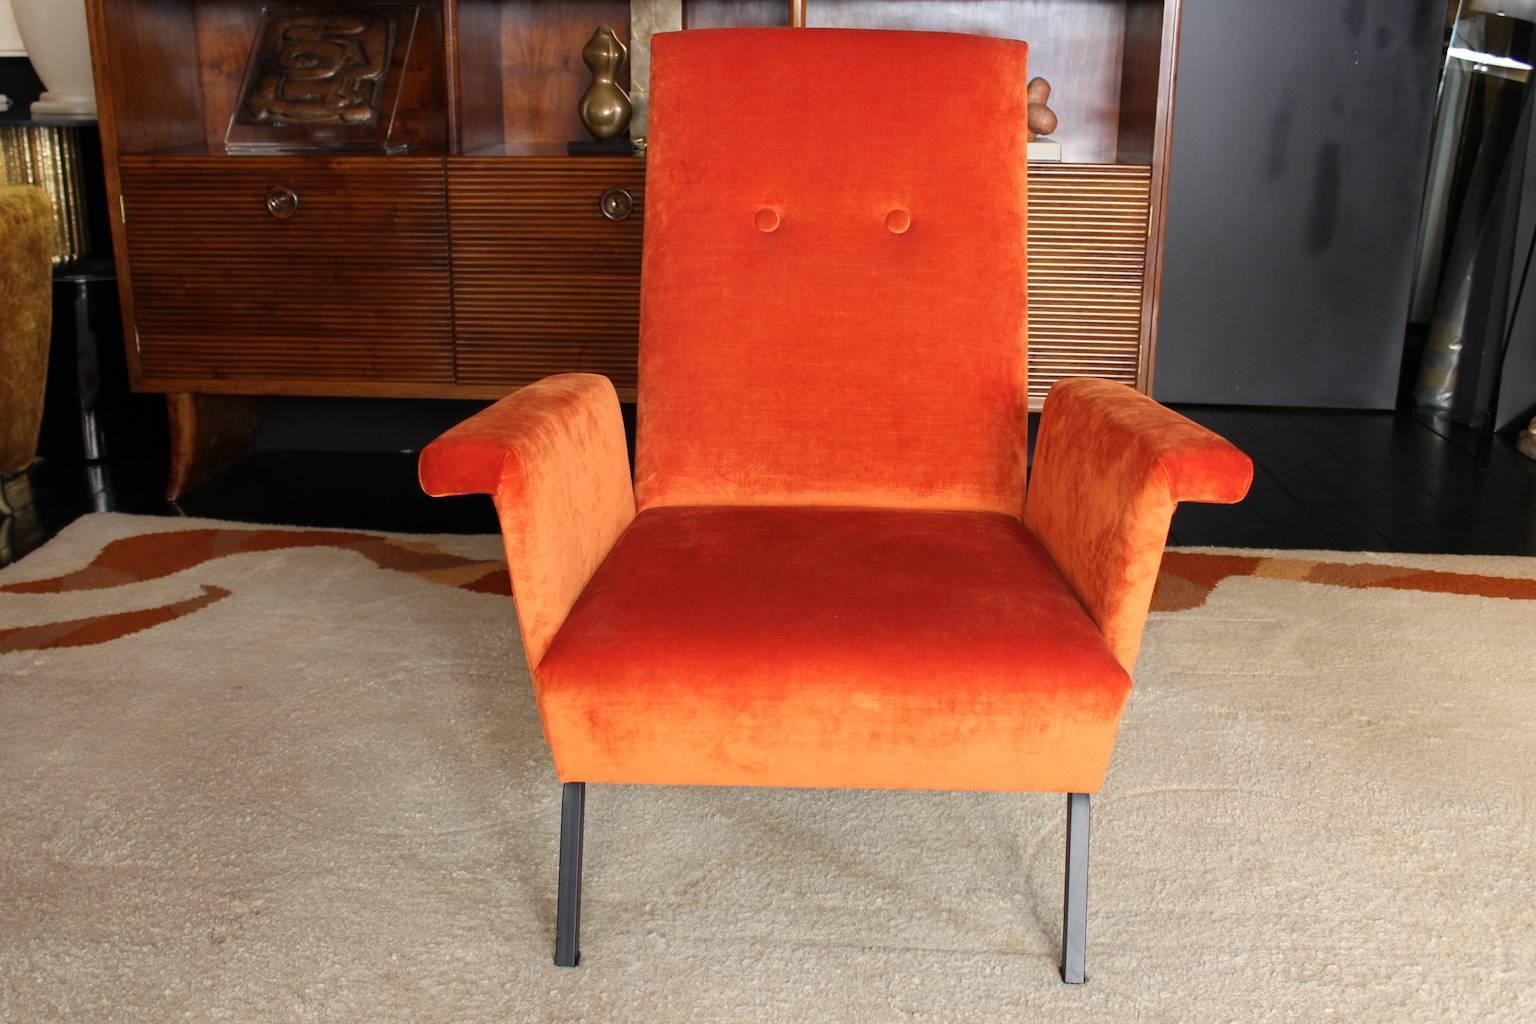 Pair of 1960s small armchairs in orange velvet, metal structure new fabric and padding.